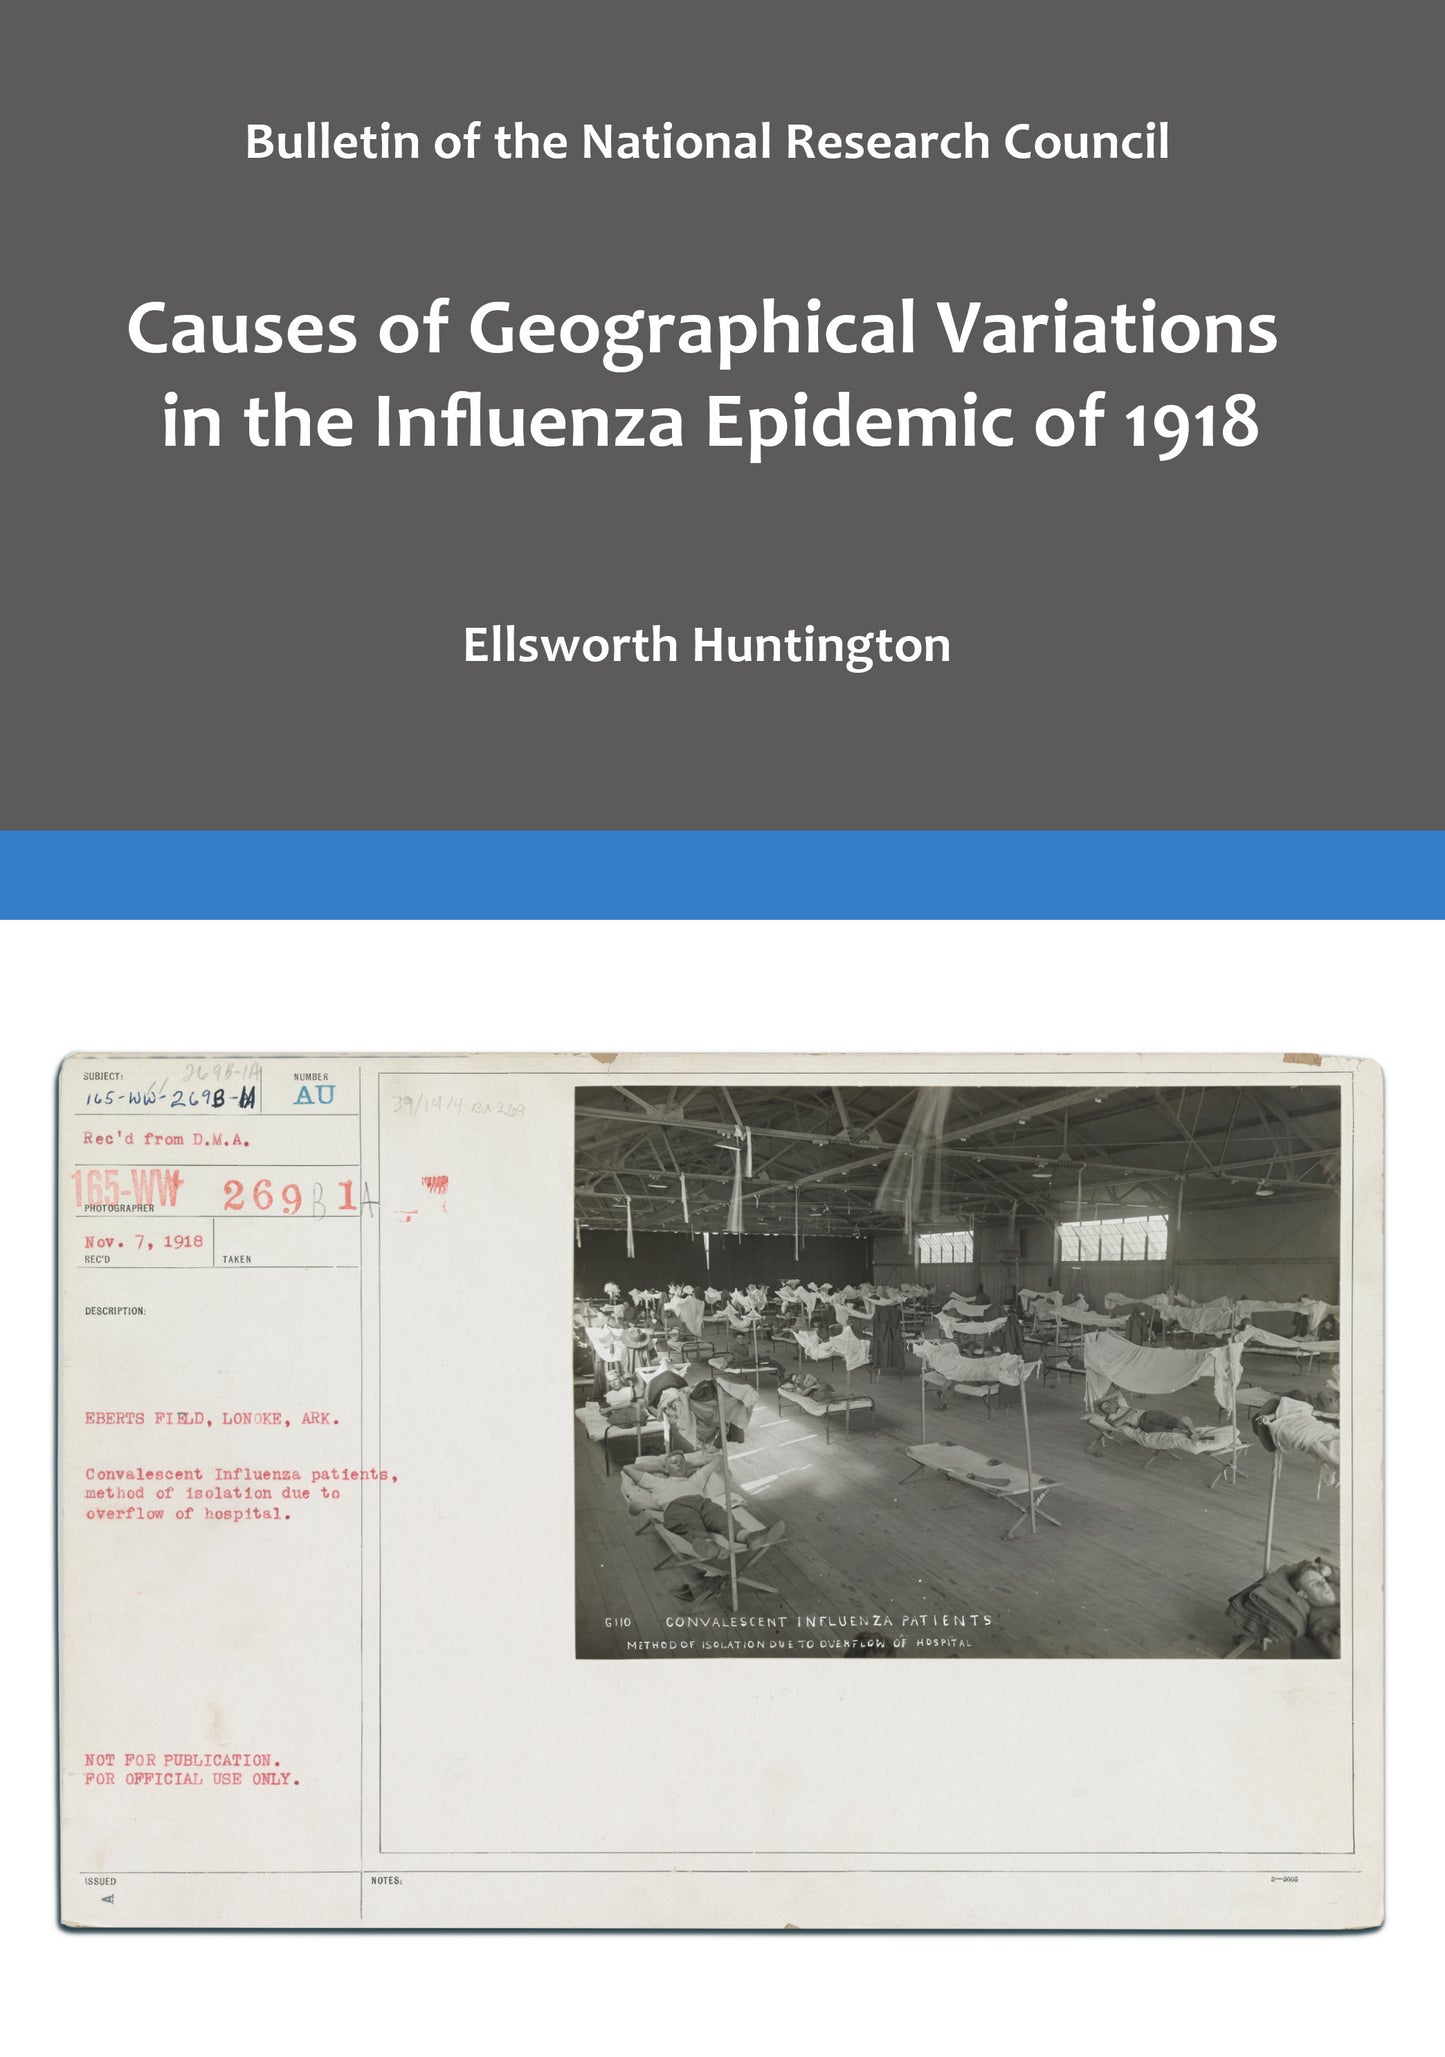 Causes of Geographical Variations in the Influenza Epidemic of 1918